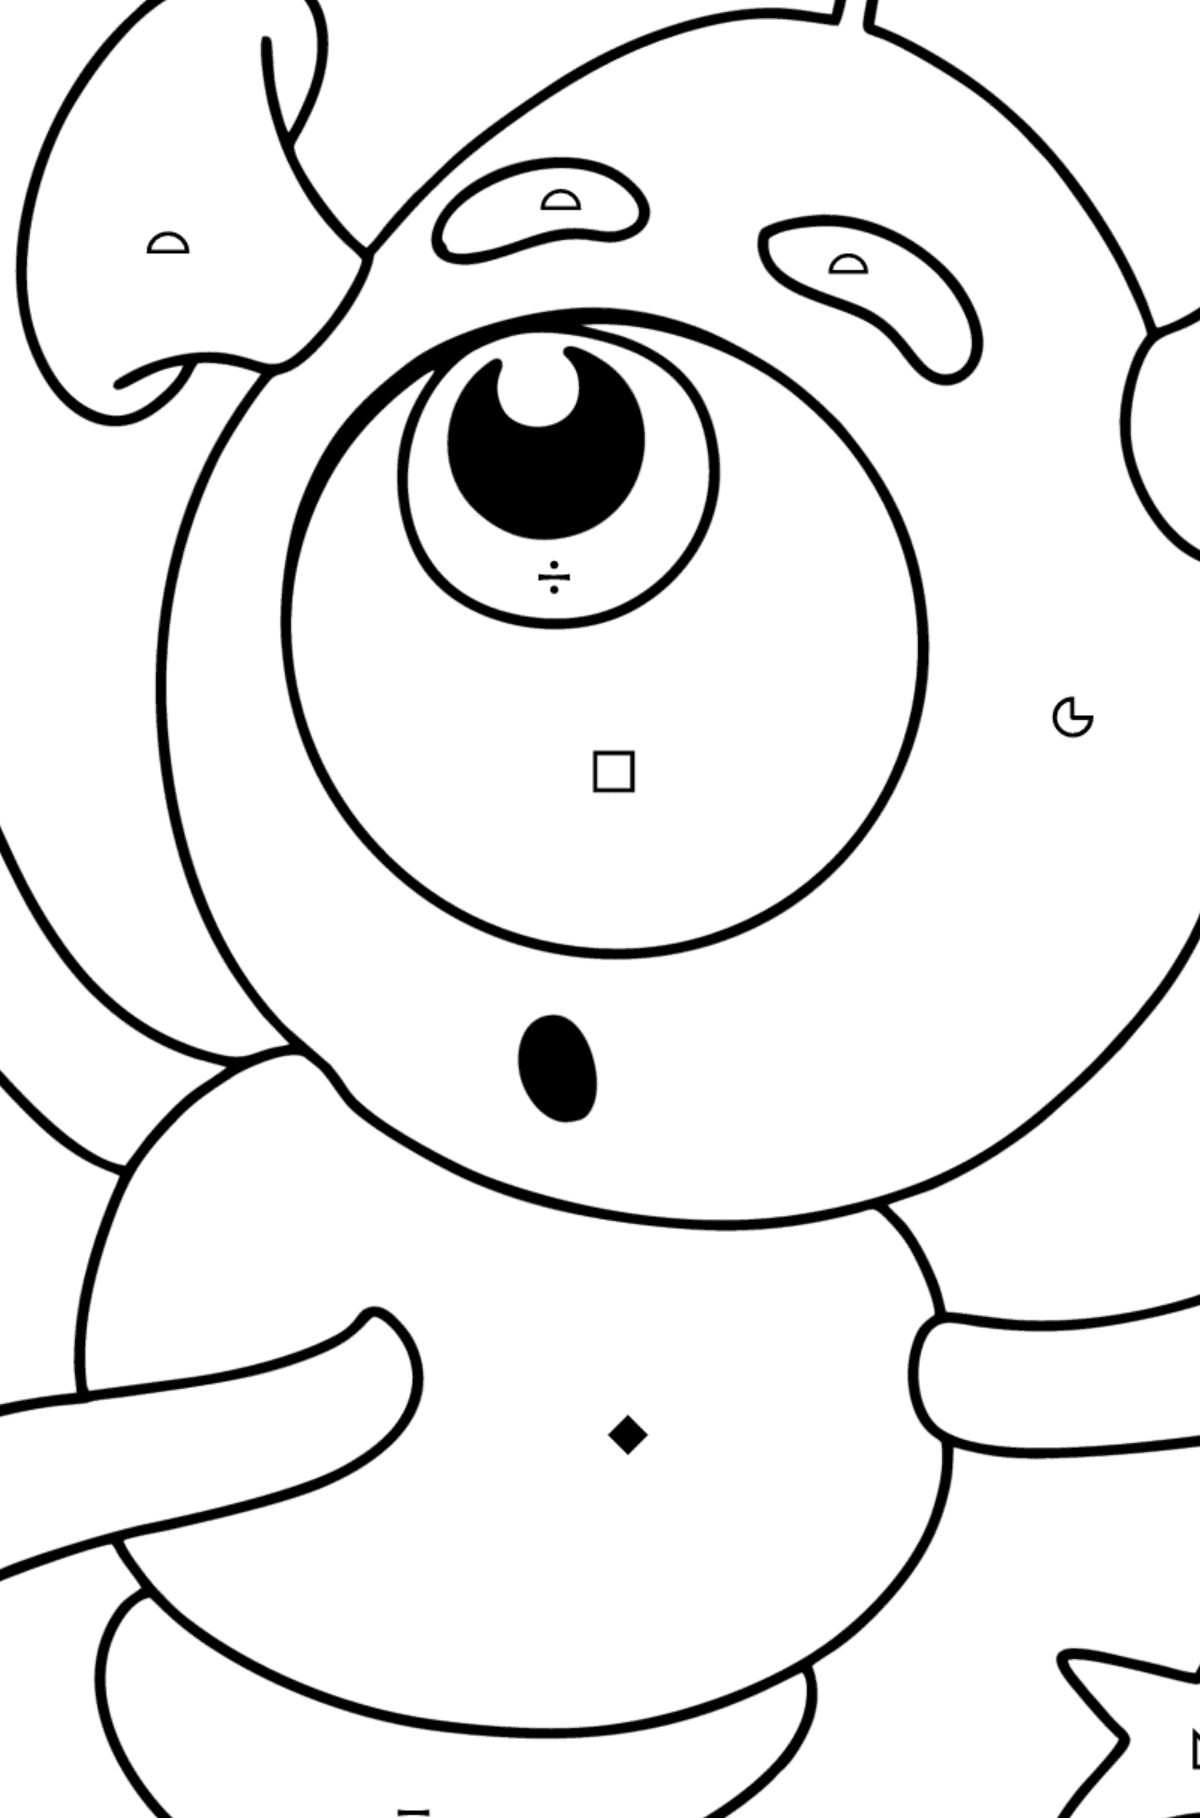 Little Alien Coloring page - Coloring by Symbols and Geometric Shapes for Kids